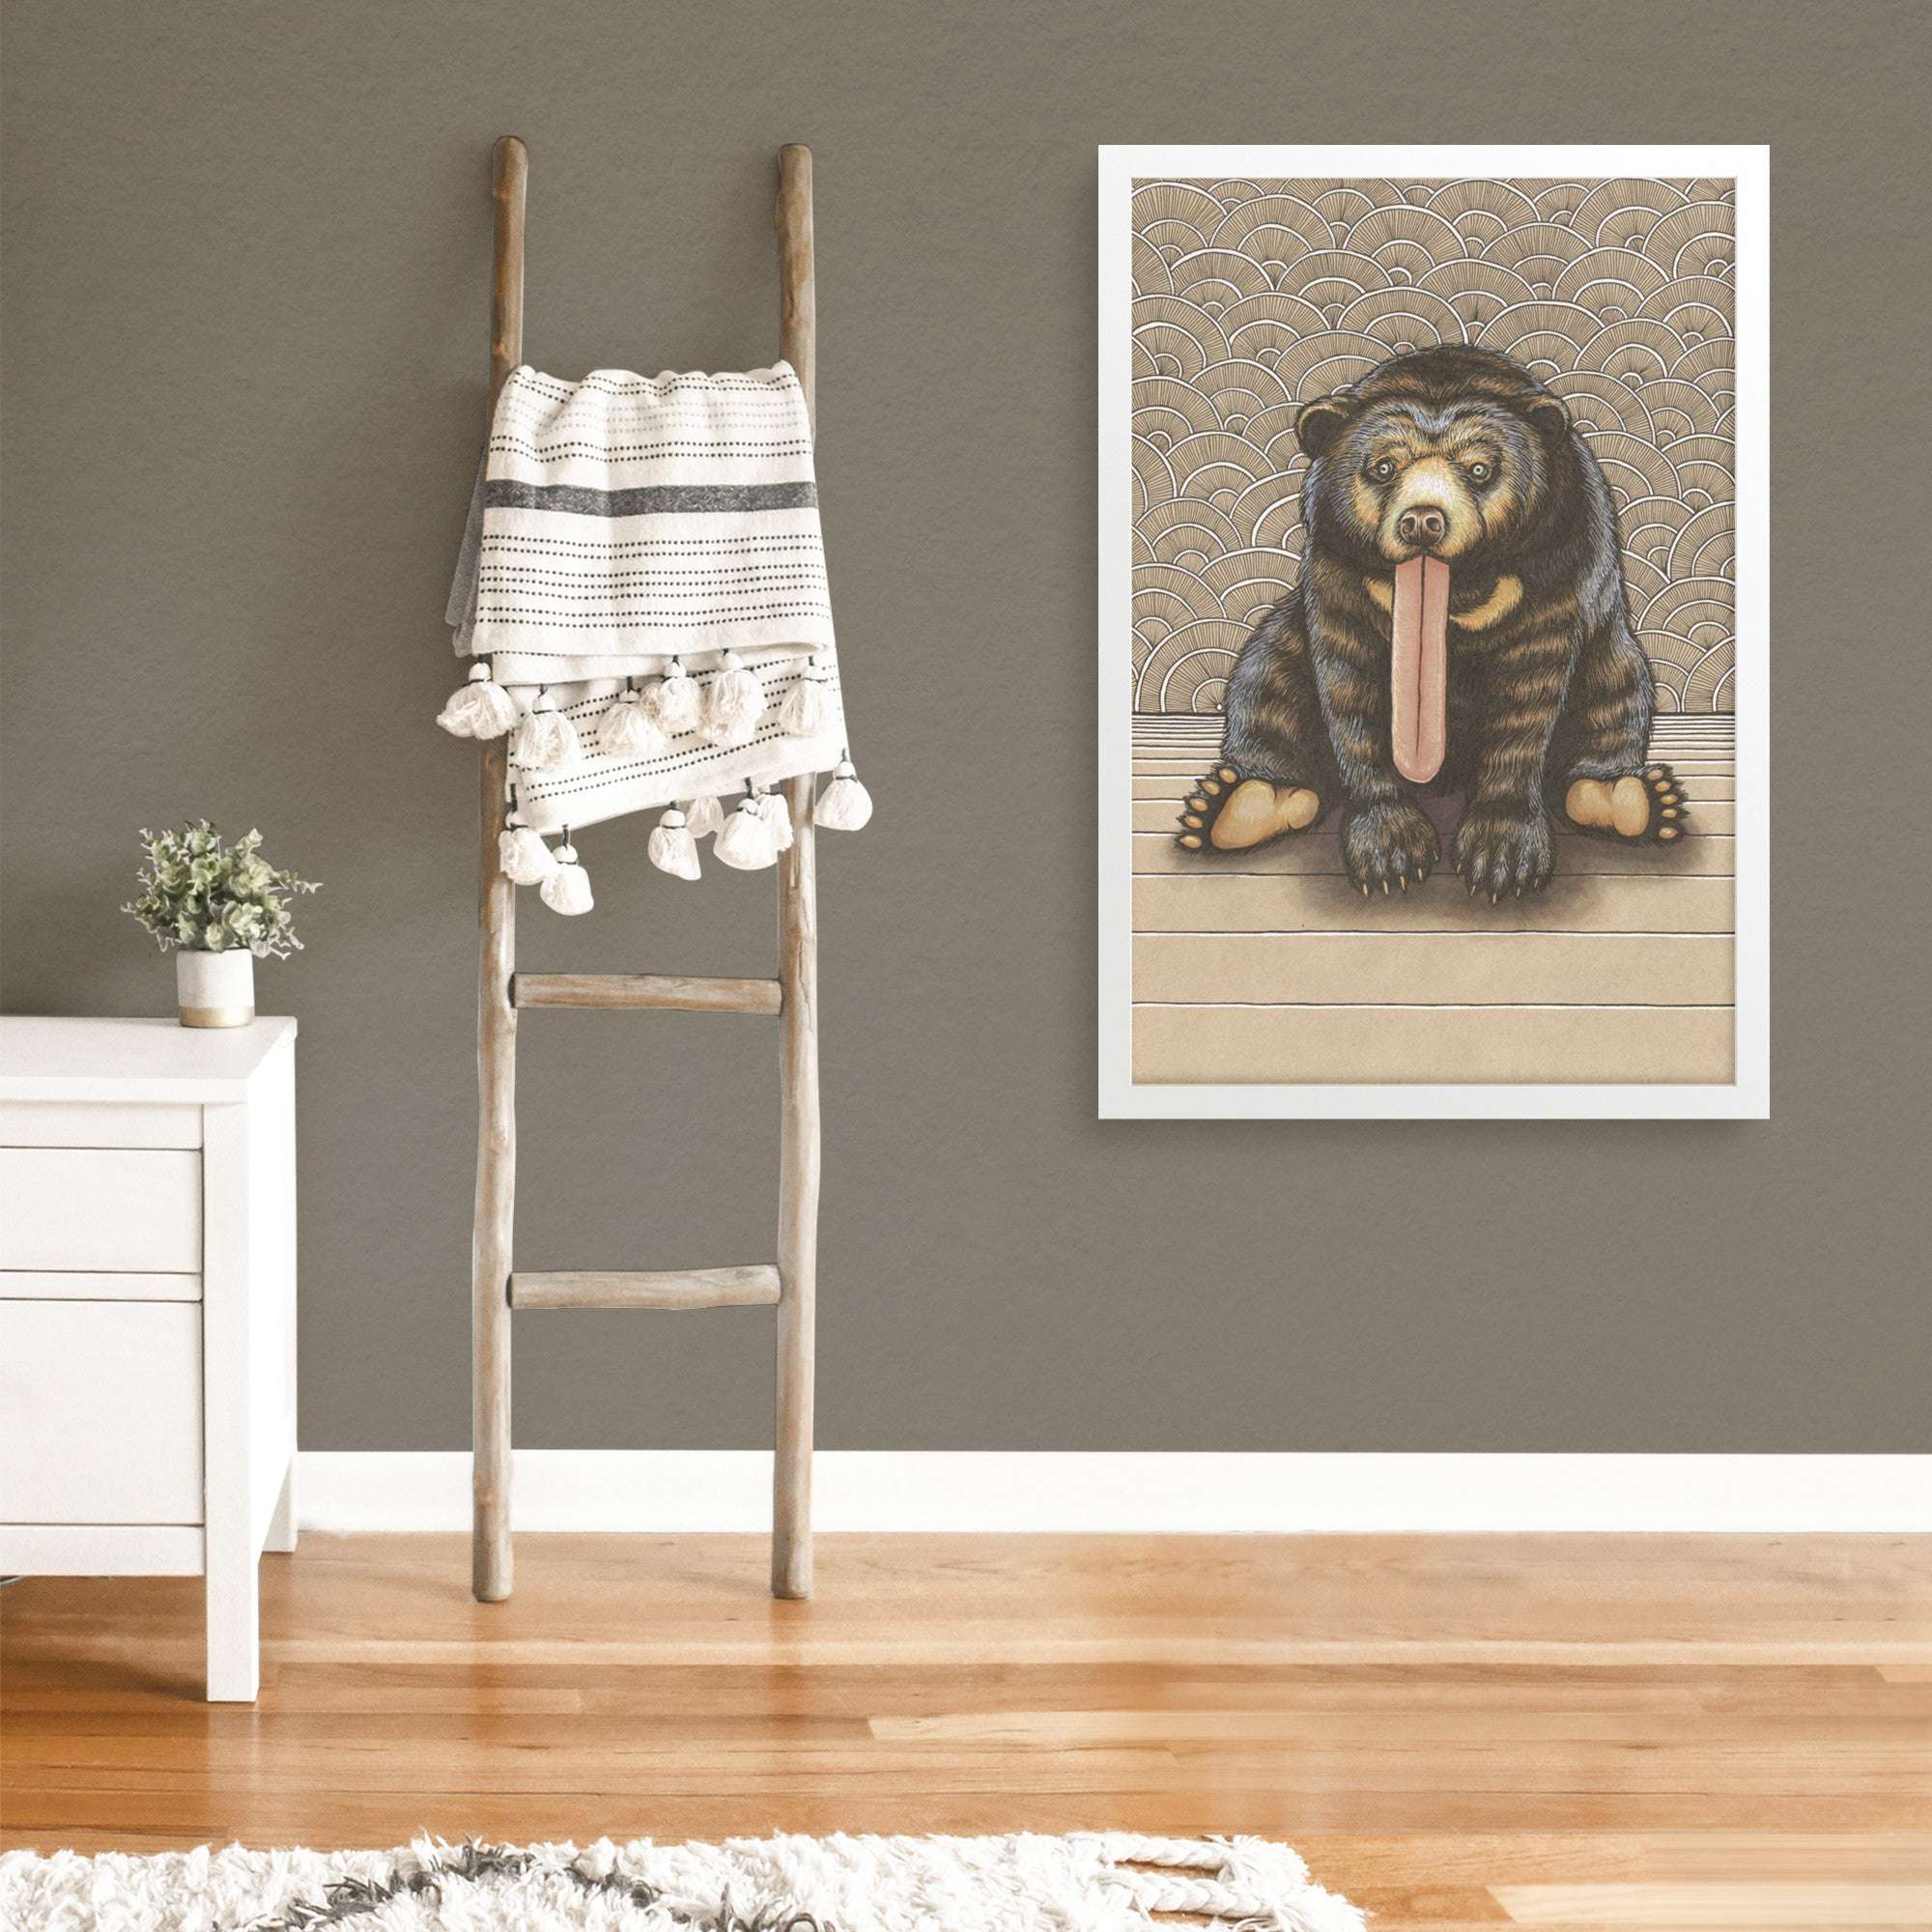 A Framed Sun Bear Art Print with its tongue out, hung on a gray wall.